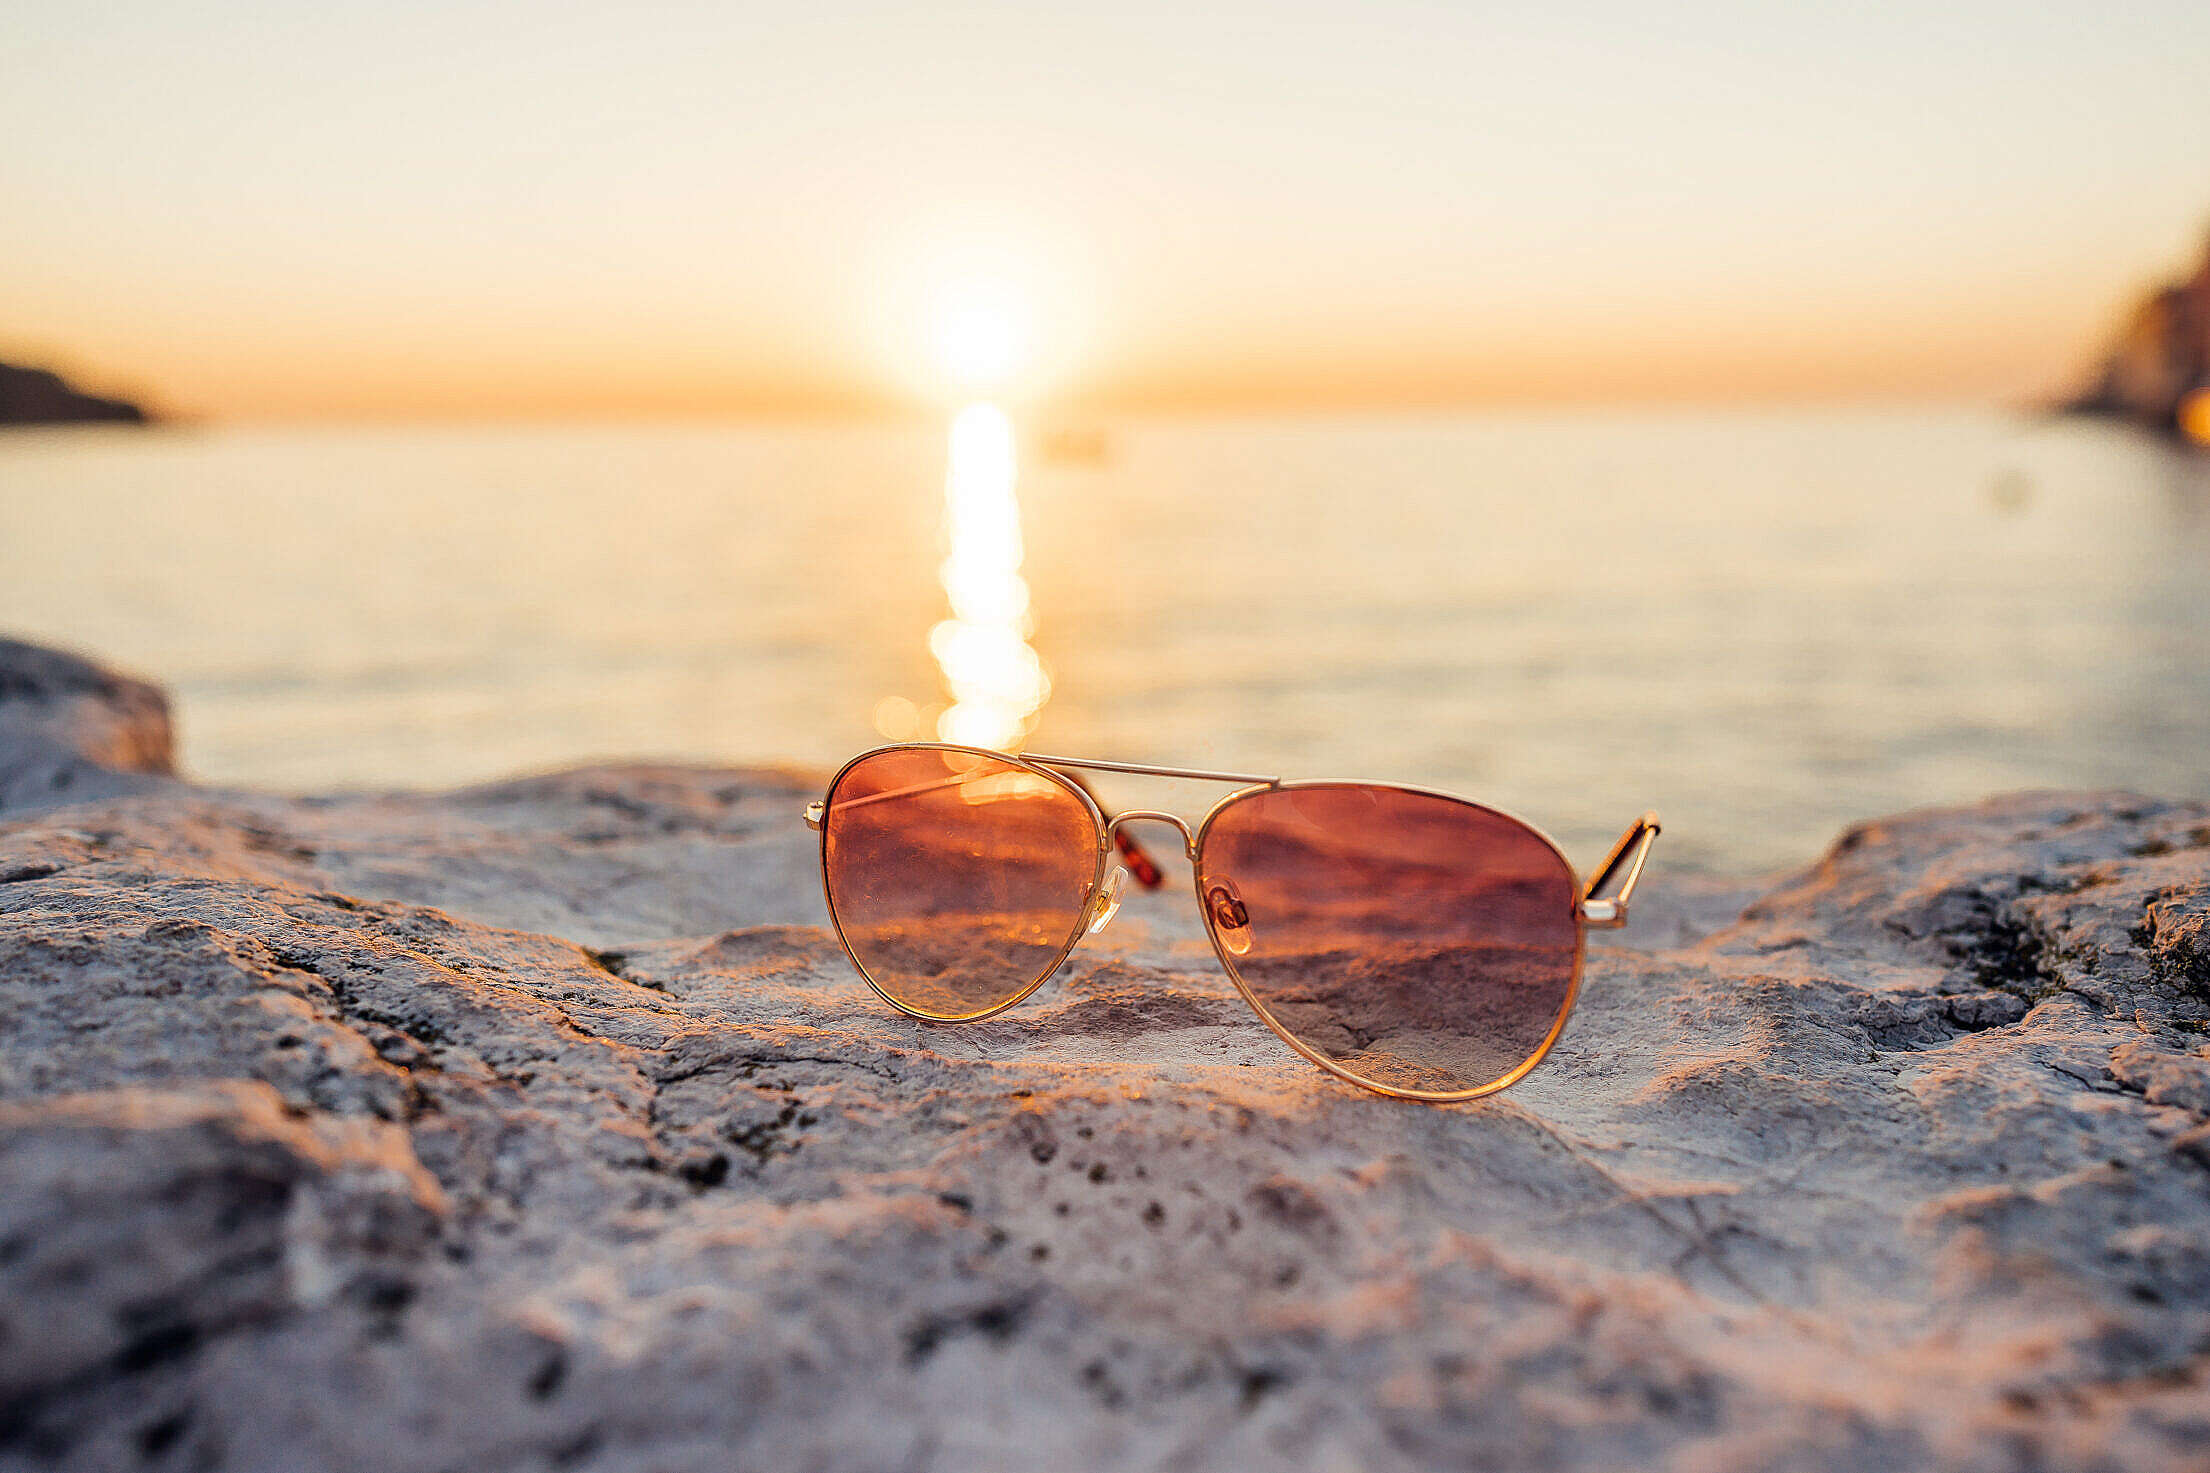 Sunglasses on a Stone with Sun Rays During Sunset Free Stock Photo